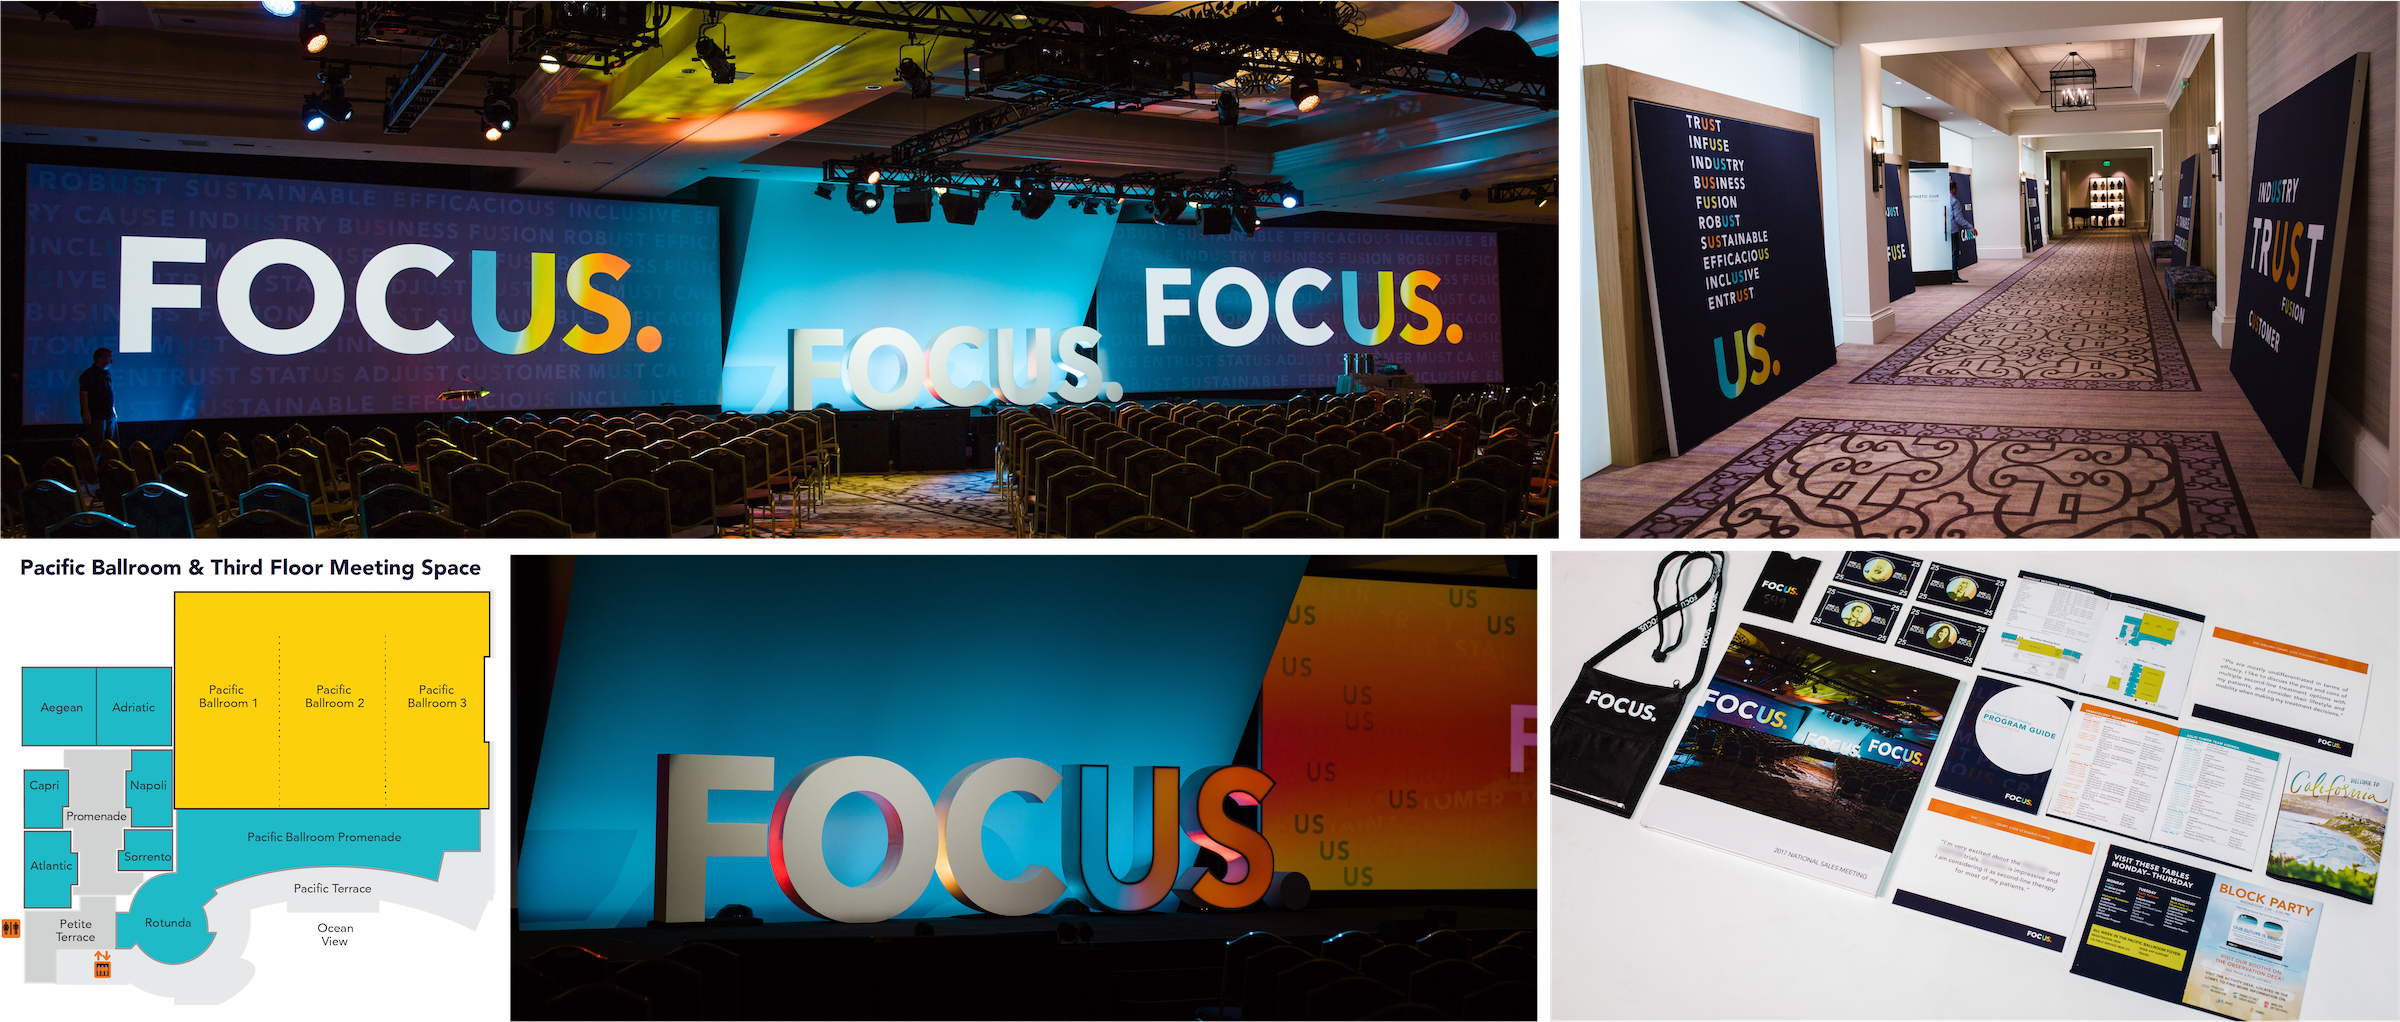 A collage of 4 images with "FOCUS branding. 1. Conference stage 2. A conference hallway with signage 3. print and swag 4. Website quiz